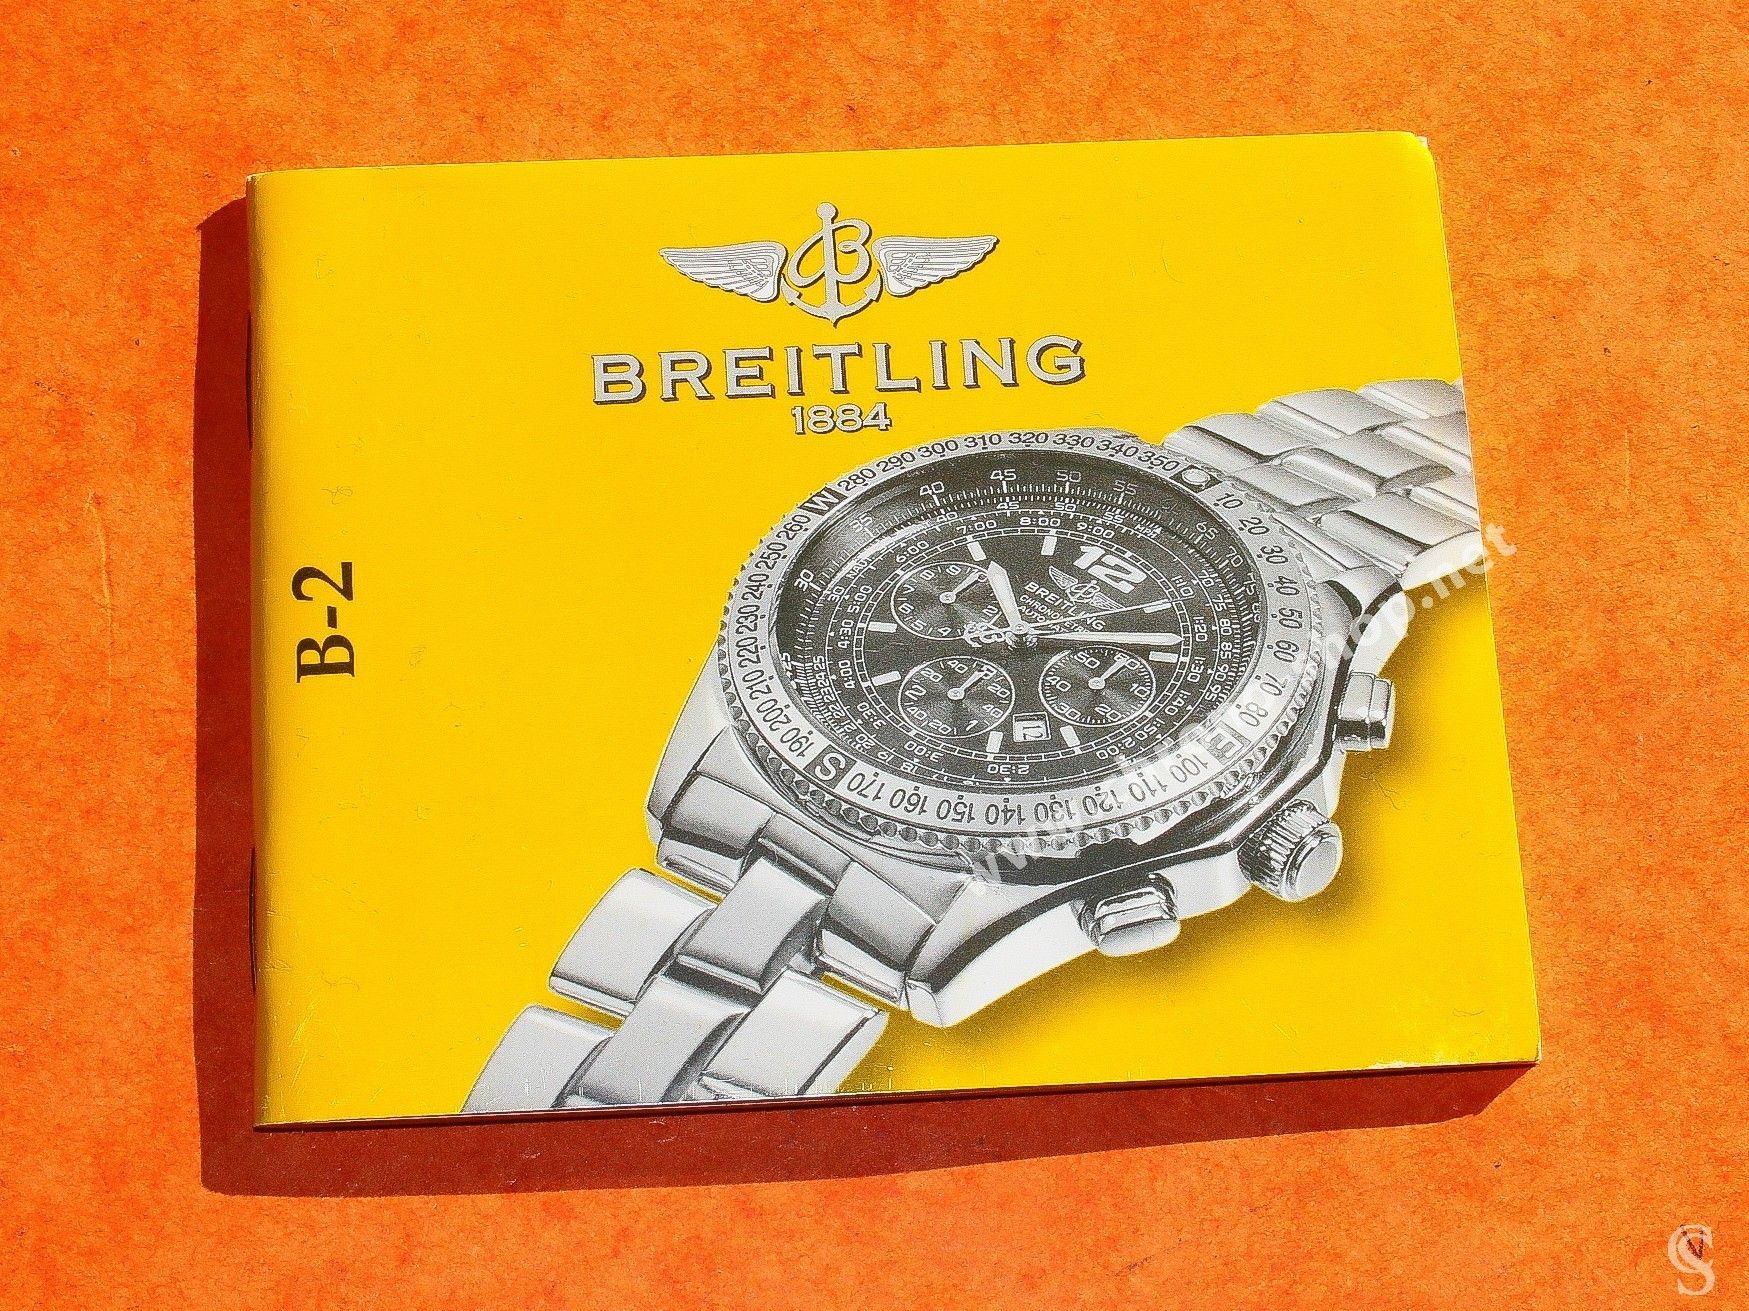 BREITLING B-3 WATCH MANUAL BOOK GUIDE BOOKLET MANUAL FOR SALE